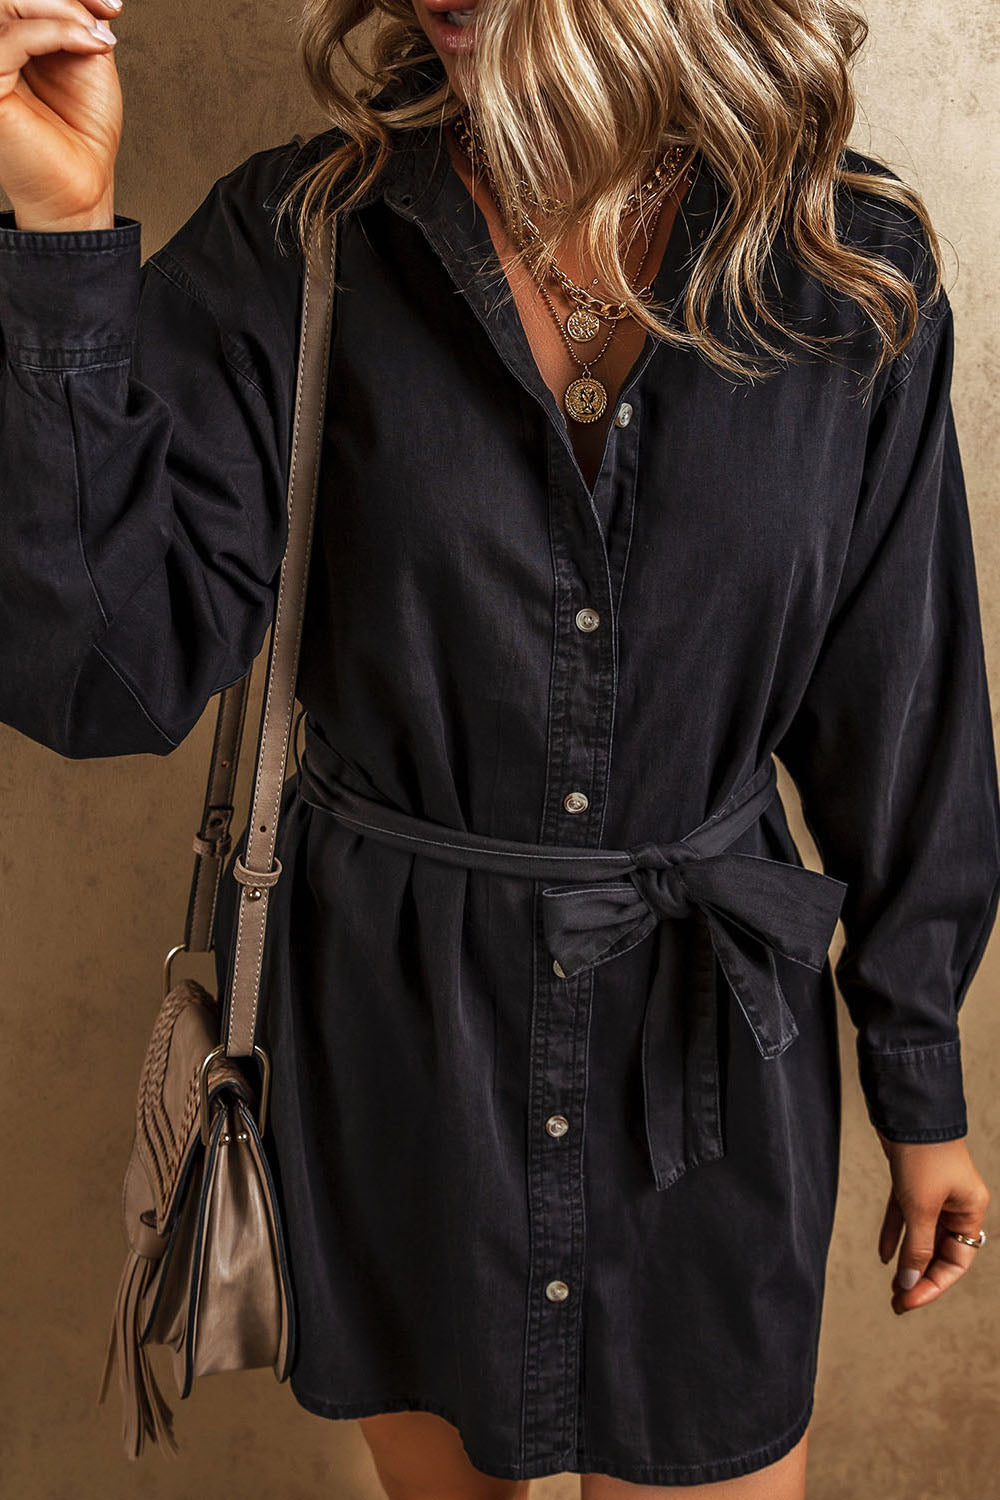 Discover the Button-Up Denim Dress: perfect blend of style & comfort for any occasion. Versatile, durable, and effortlessly chic. Shop now!